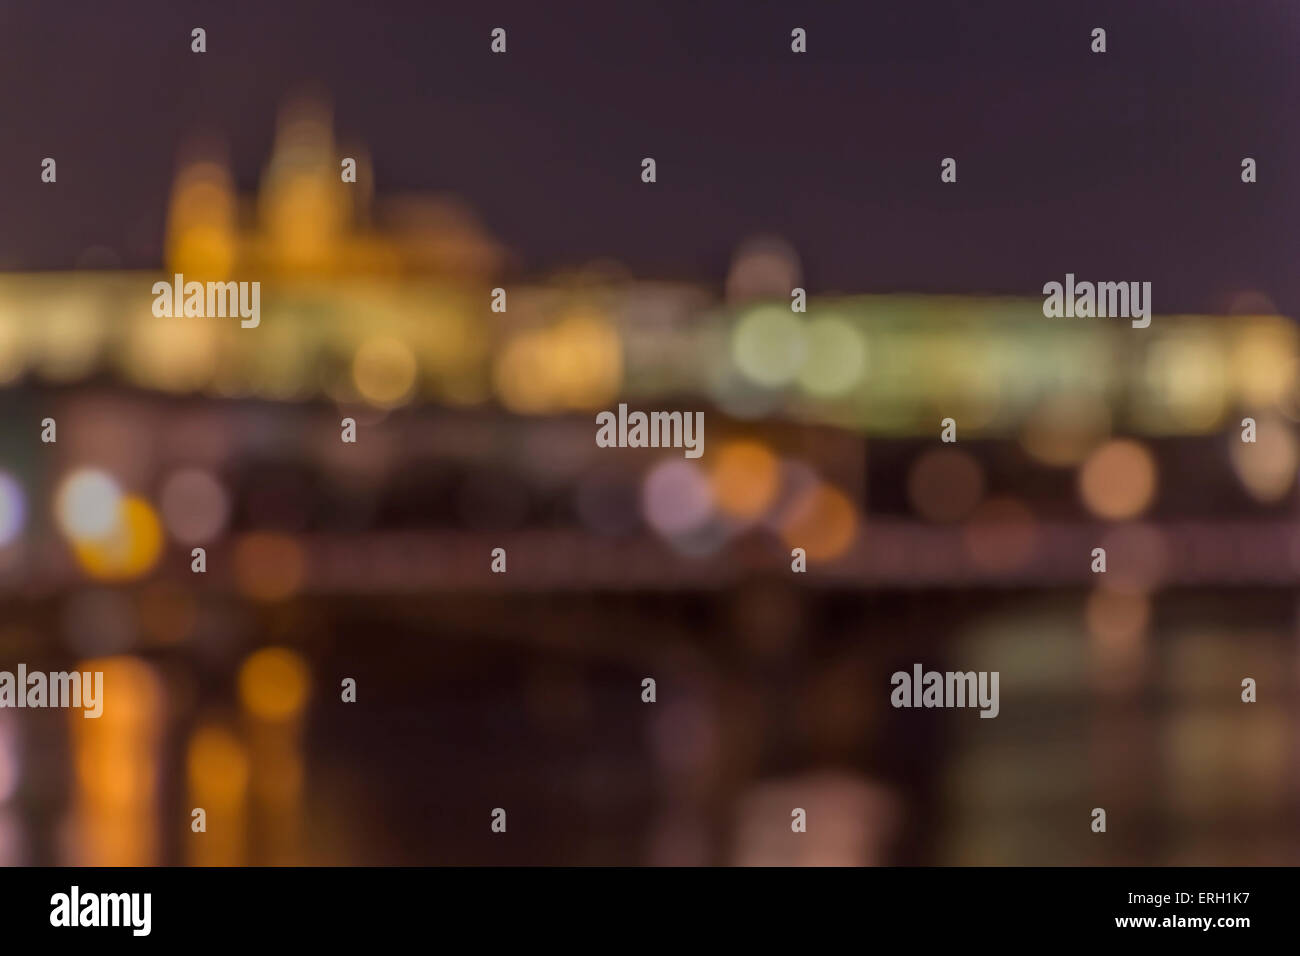 Prague panorama, abstract bokeh background. Concept of historical city at night. Stock Photo